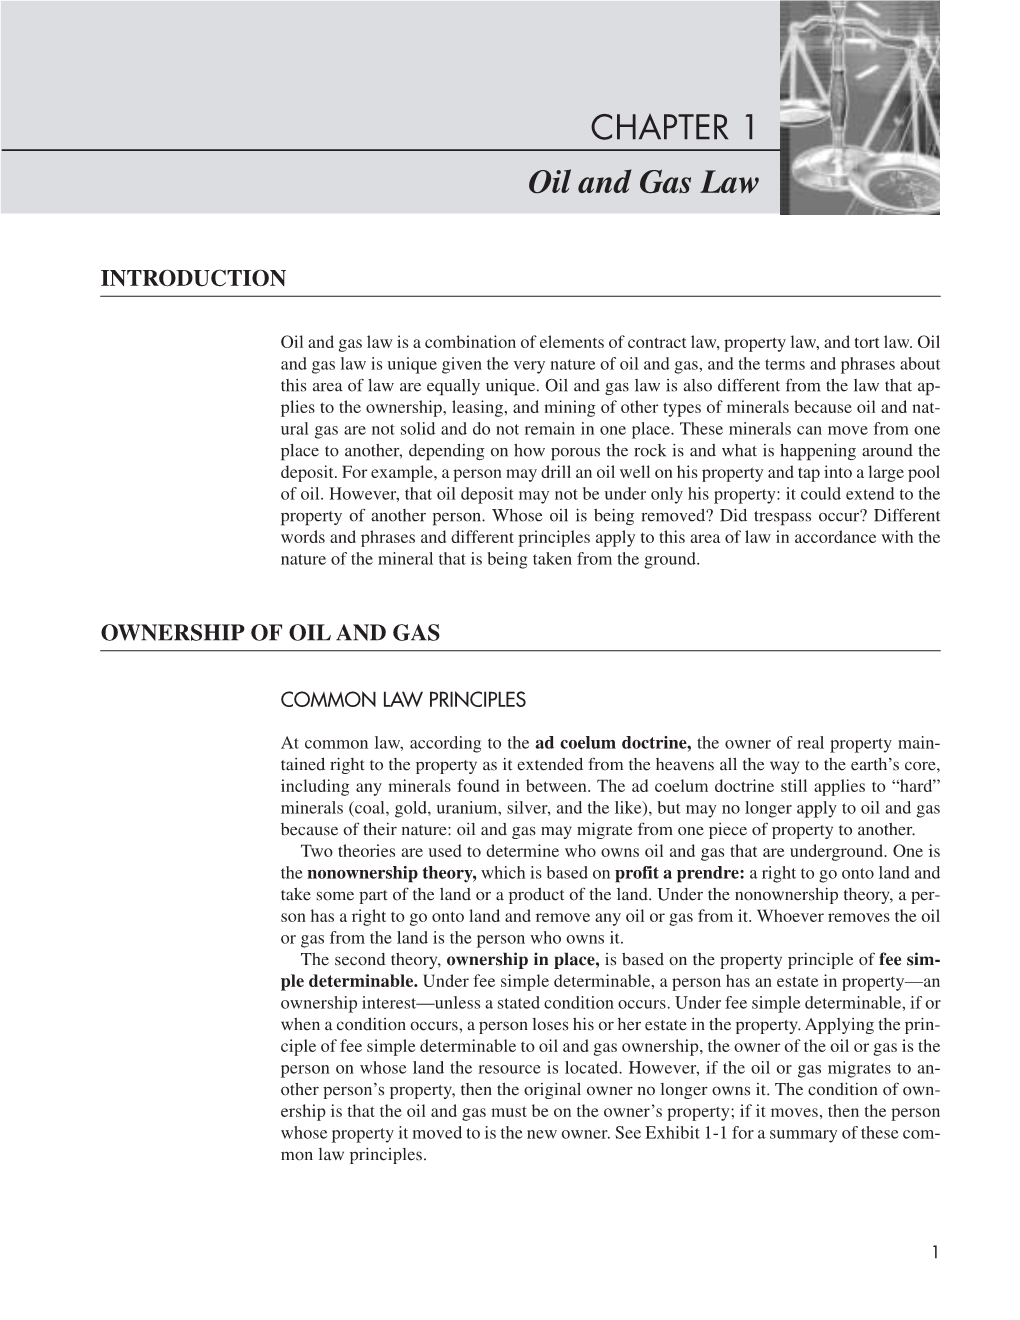 CHAPTER 1 Oil and Gas Law